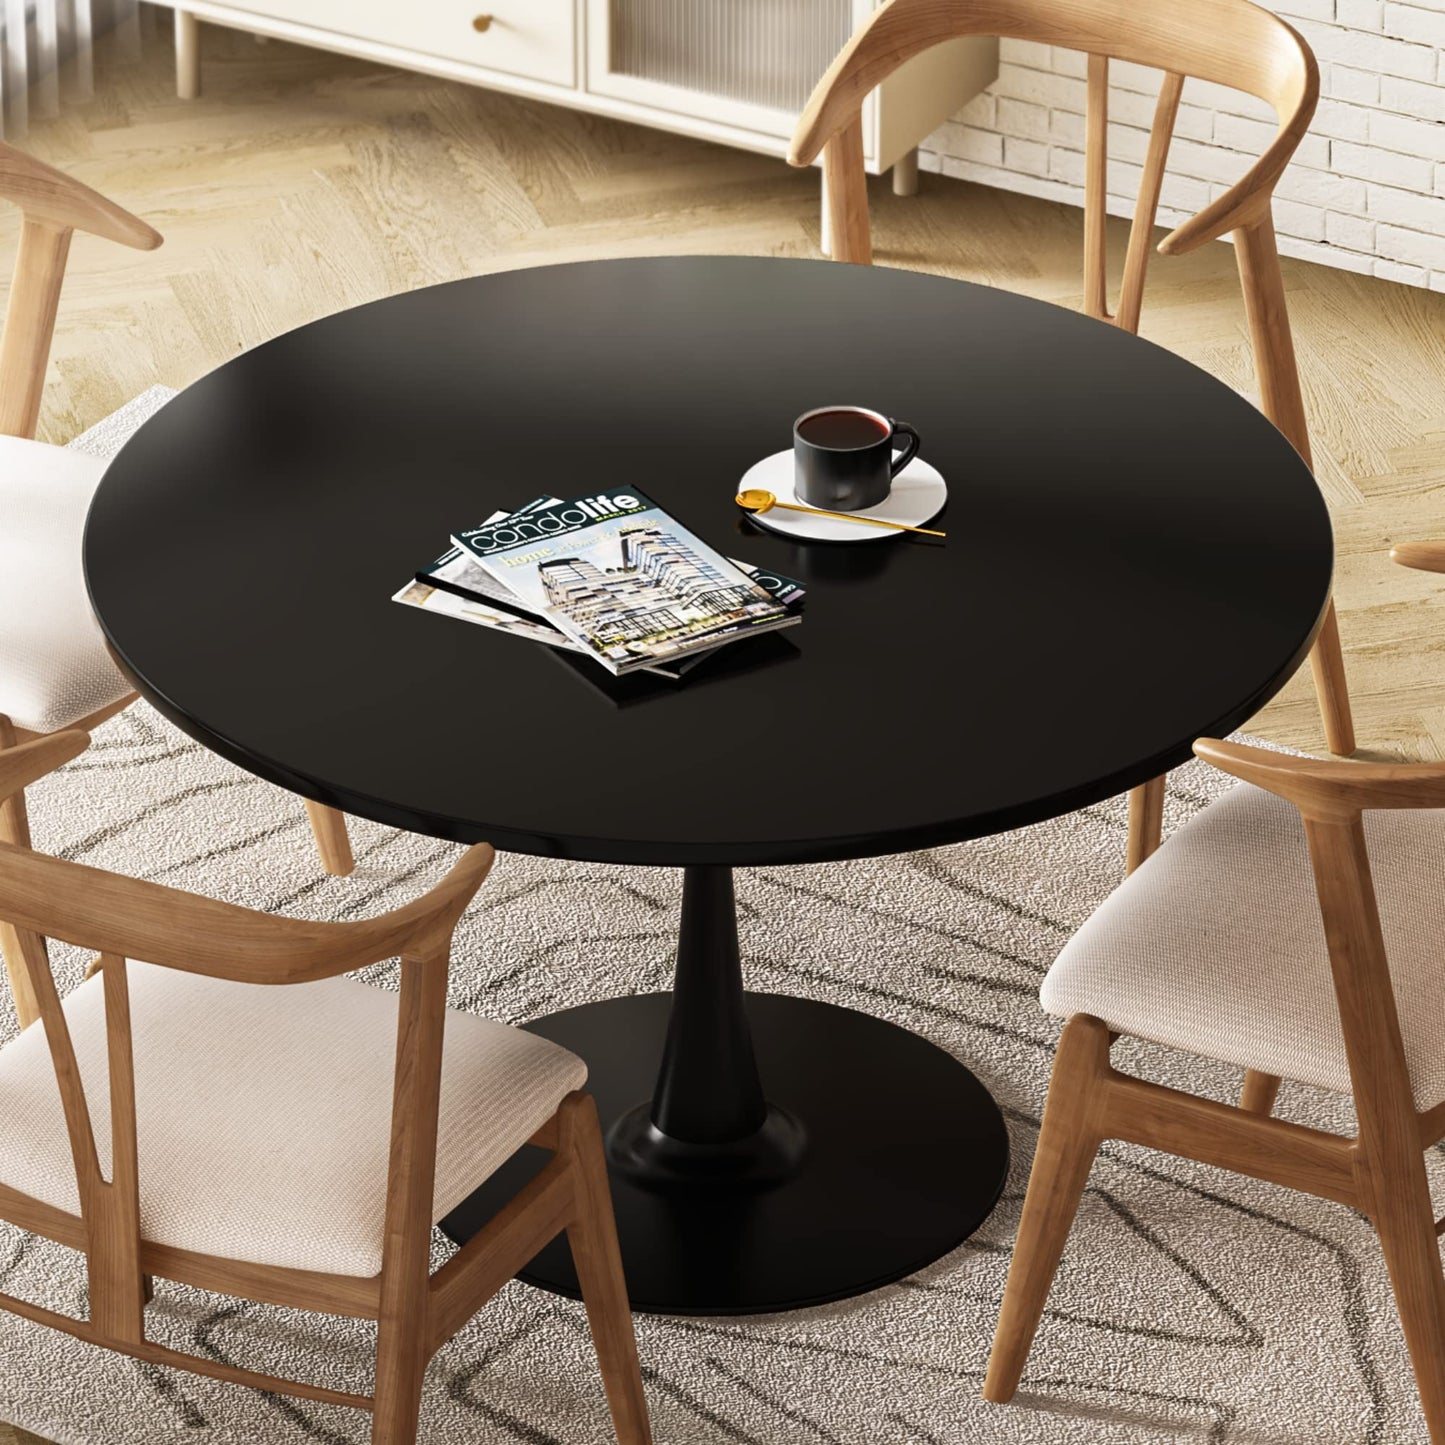 DKLGG Black Round Dining Table, 42.1" Tulip Table Kitchen Dining Table 4-6 People with MDF Table Top & Pedestal Base, Mid-Century End Table Leisure Coffee Table Office Living Room Table